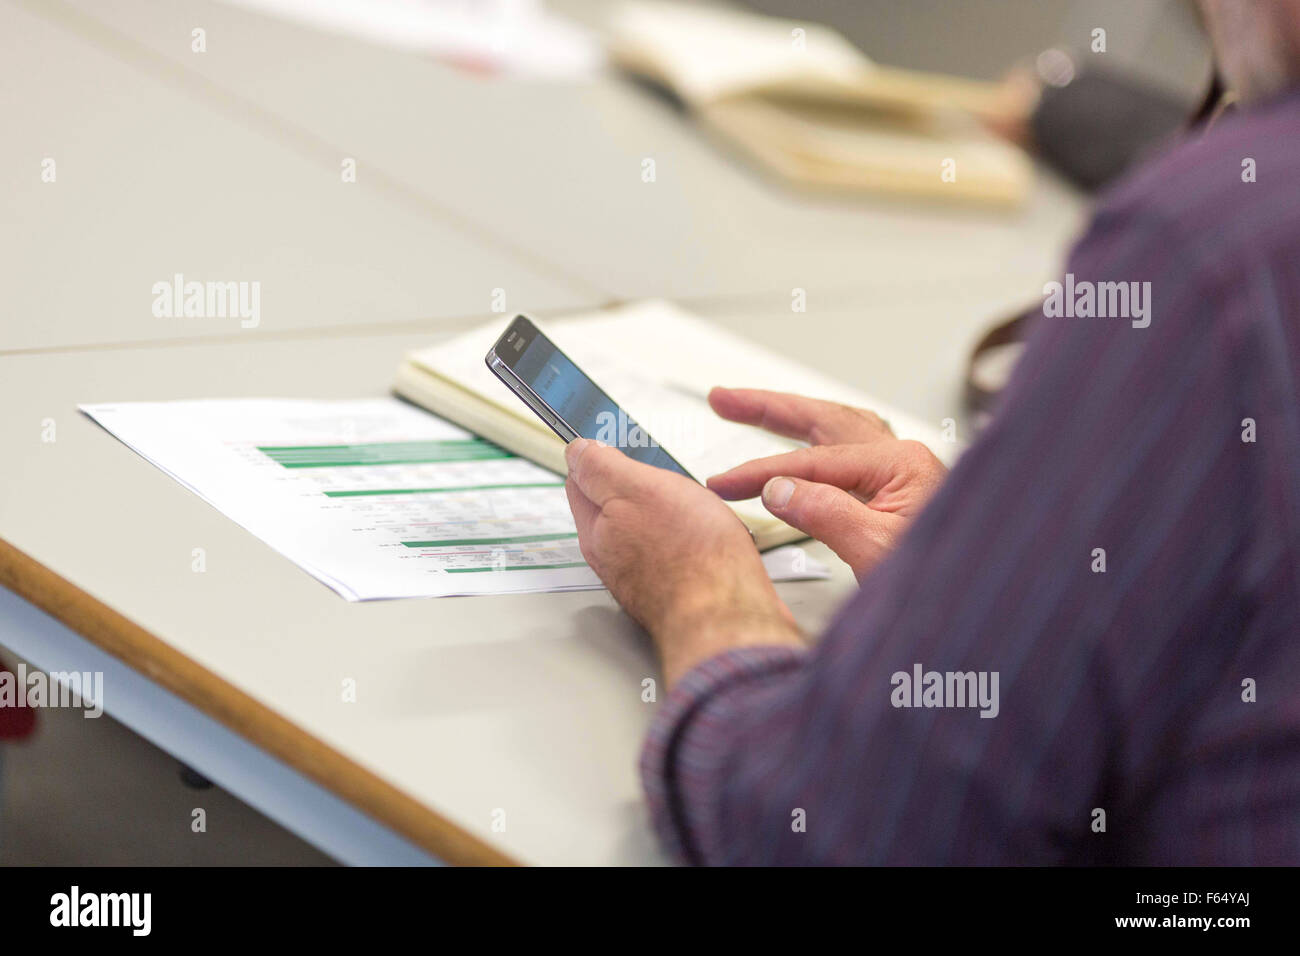 a man uses a a touch screen smartphone Stock Photo